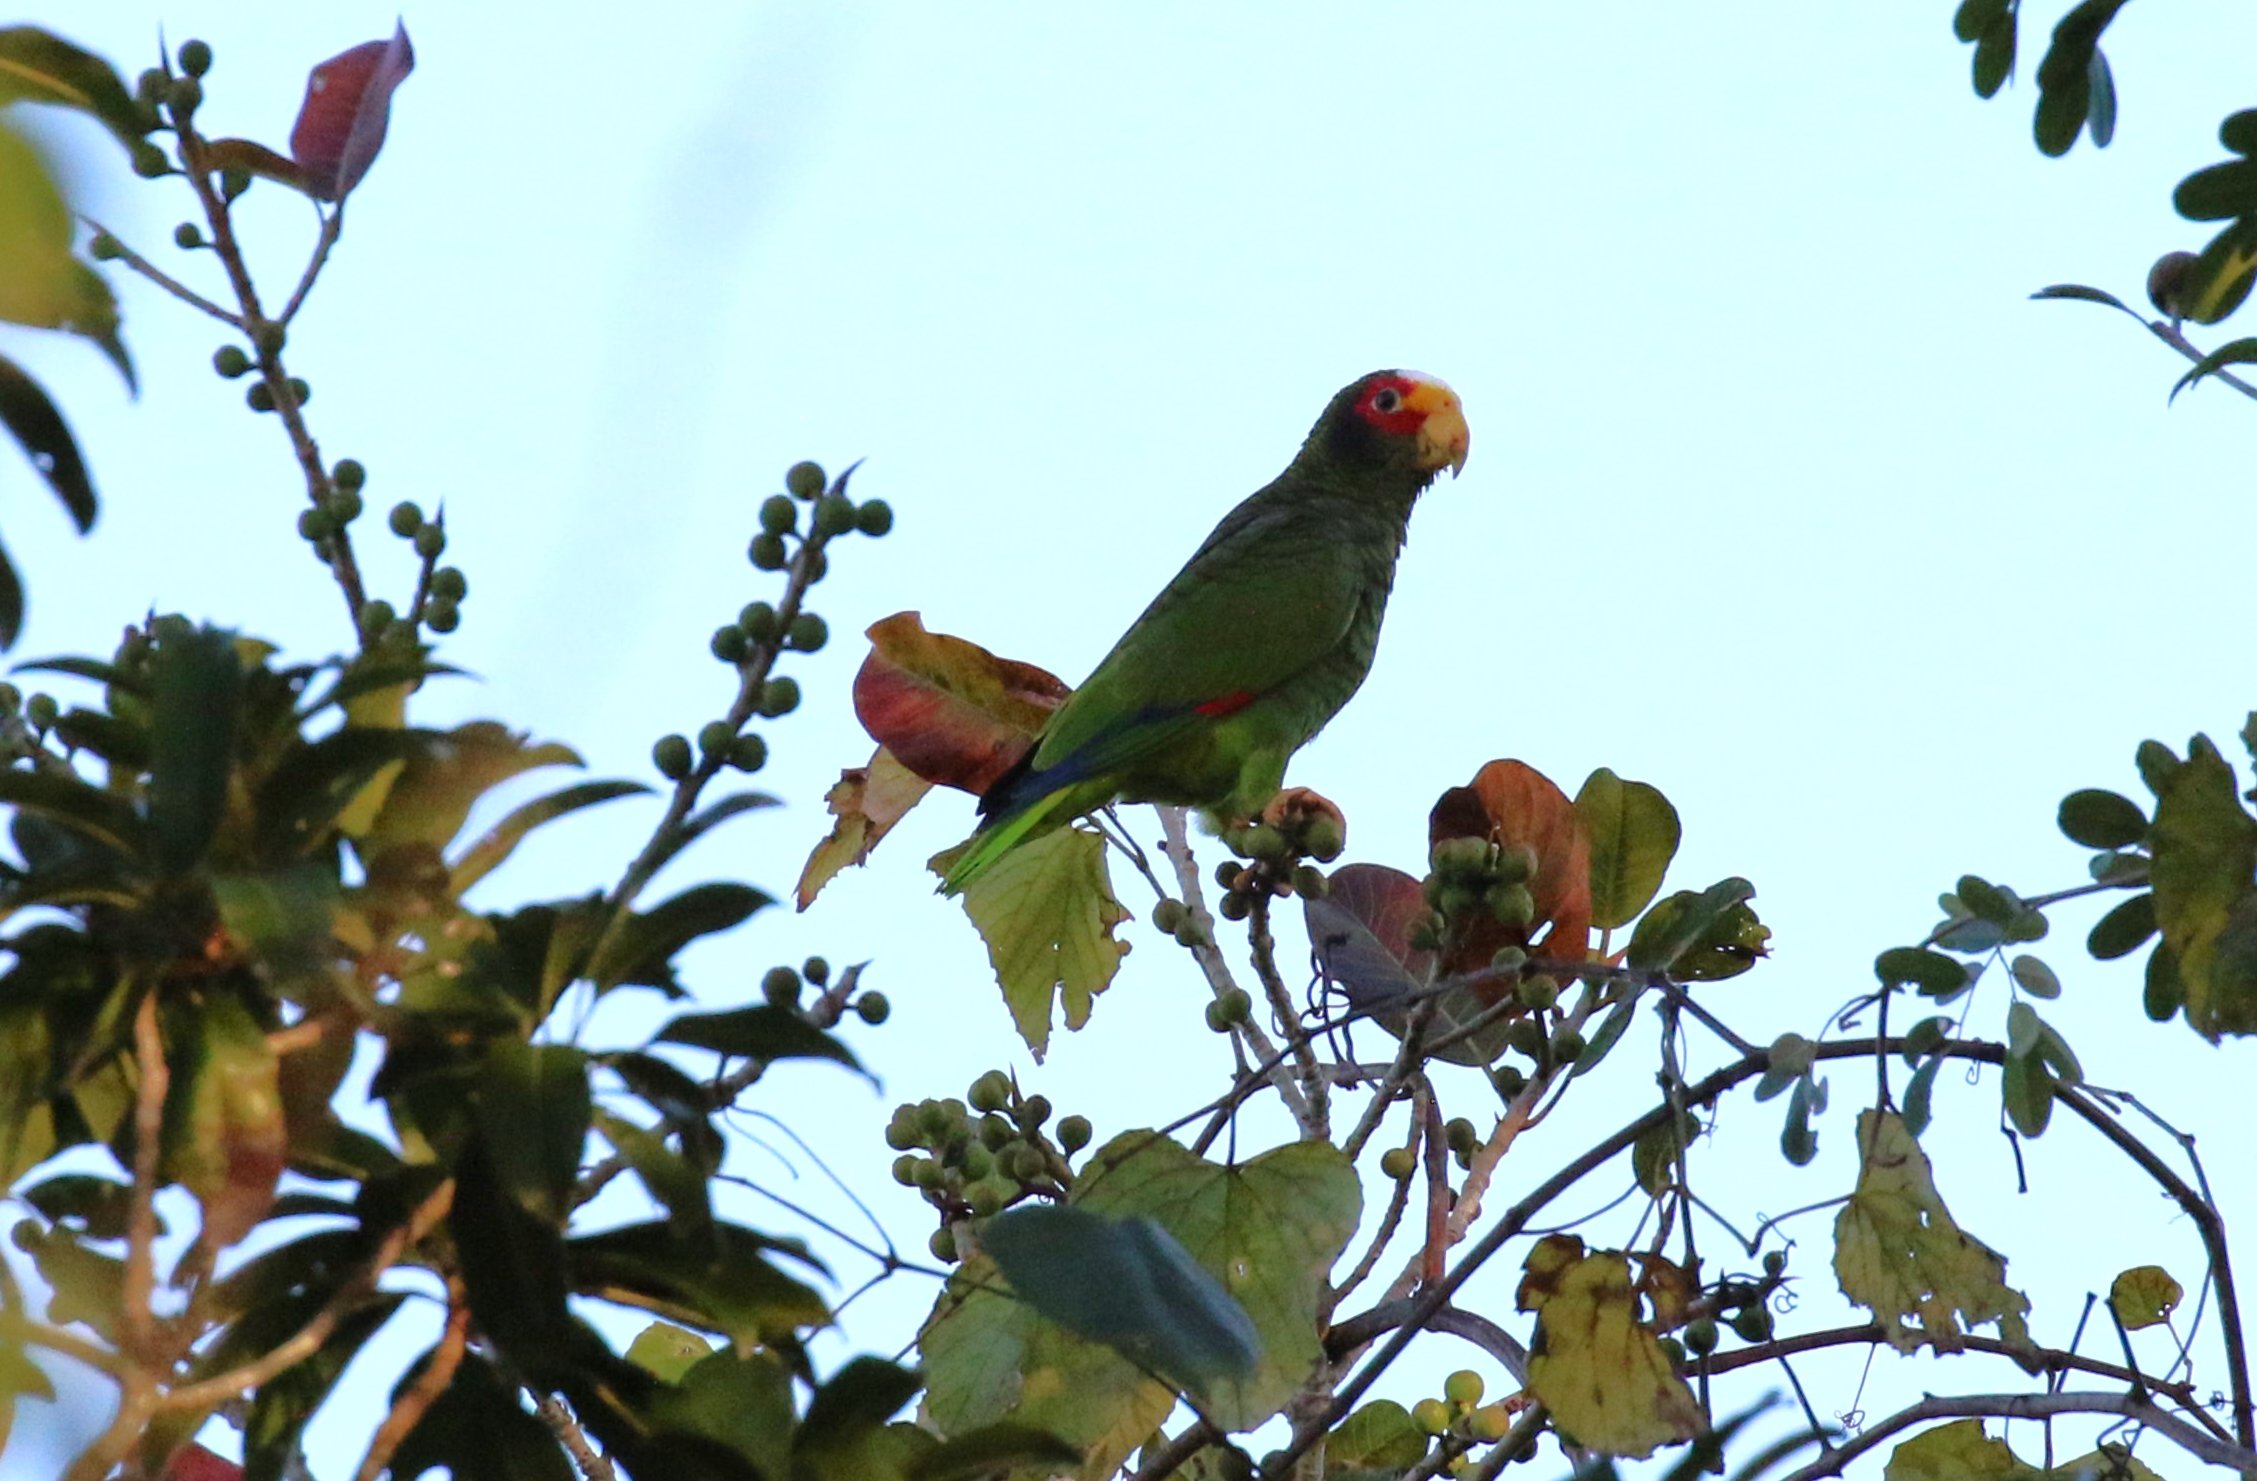 Yellow-lored Parrot - photo by participant Diane Eubanks